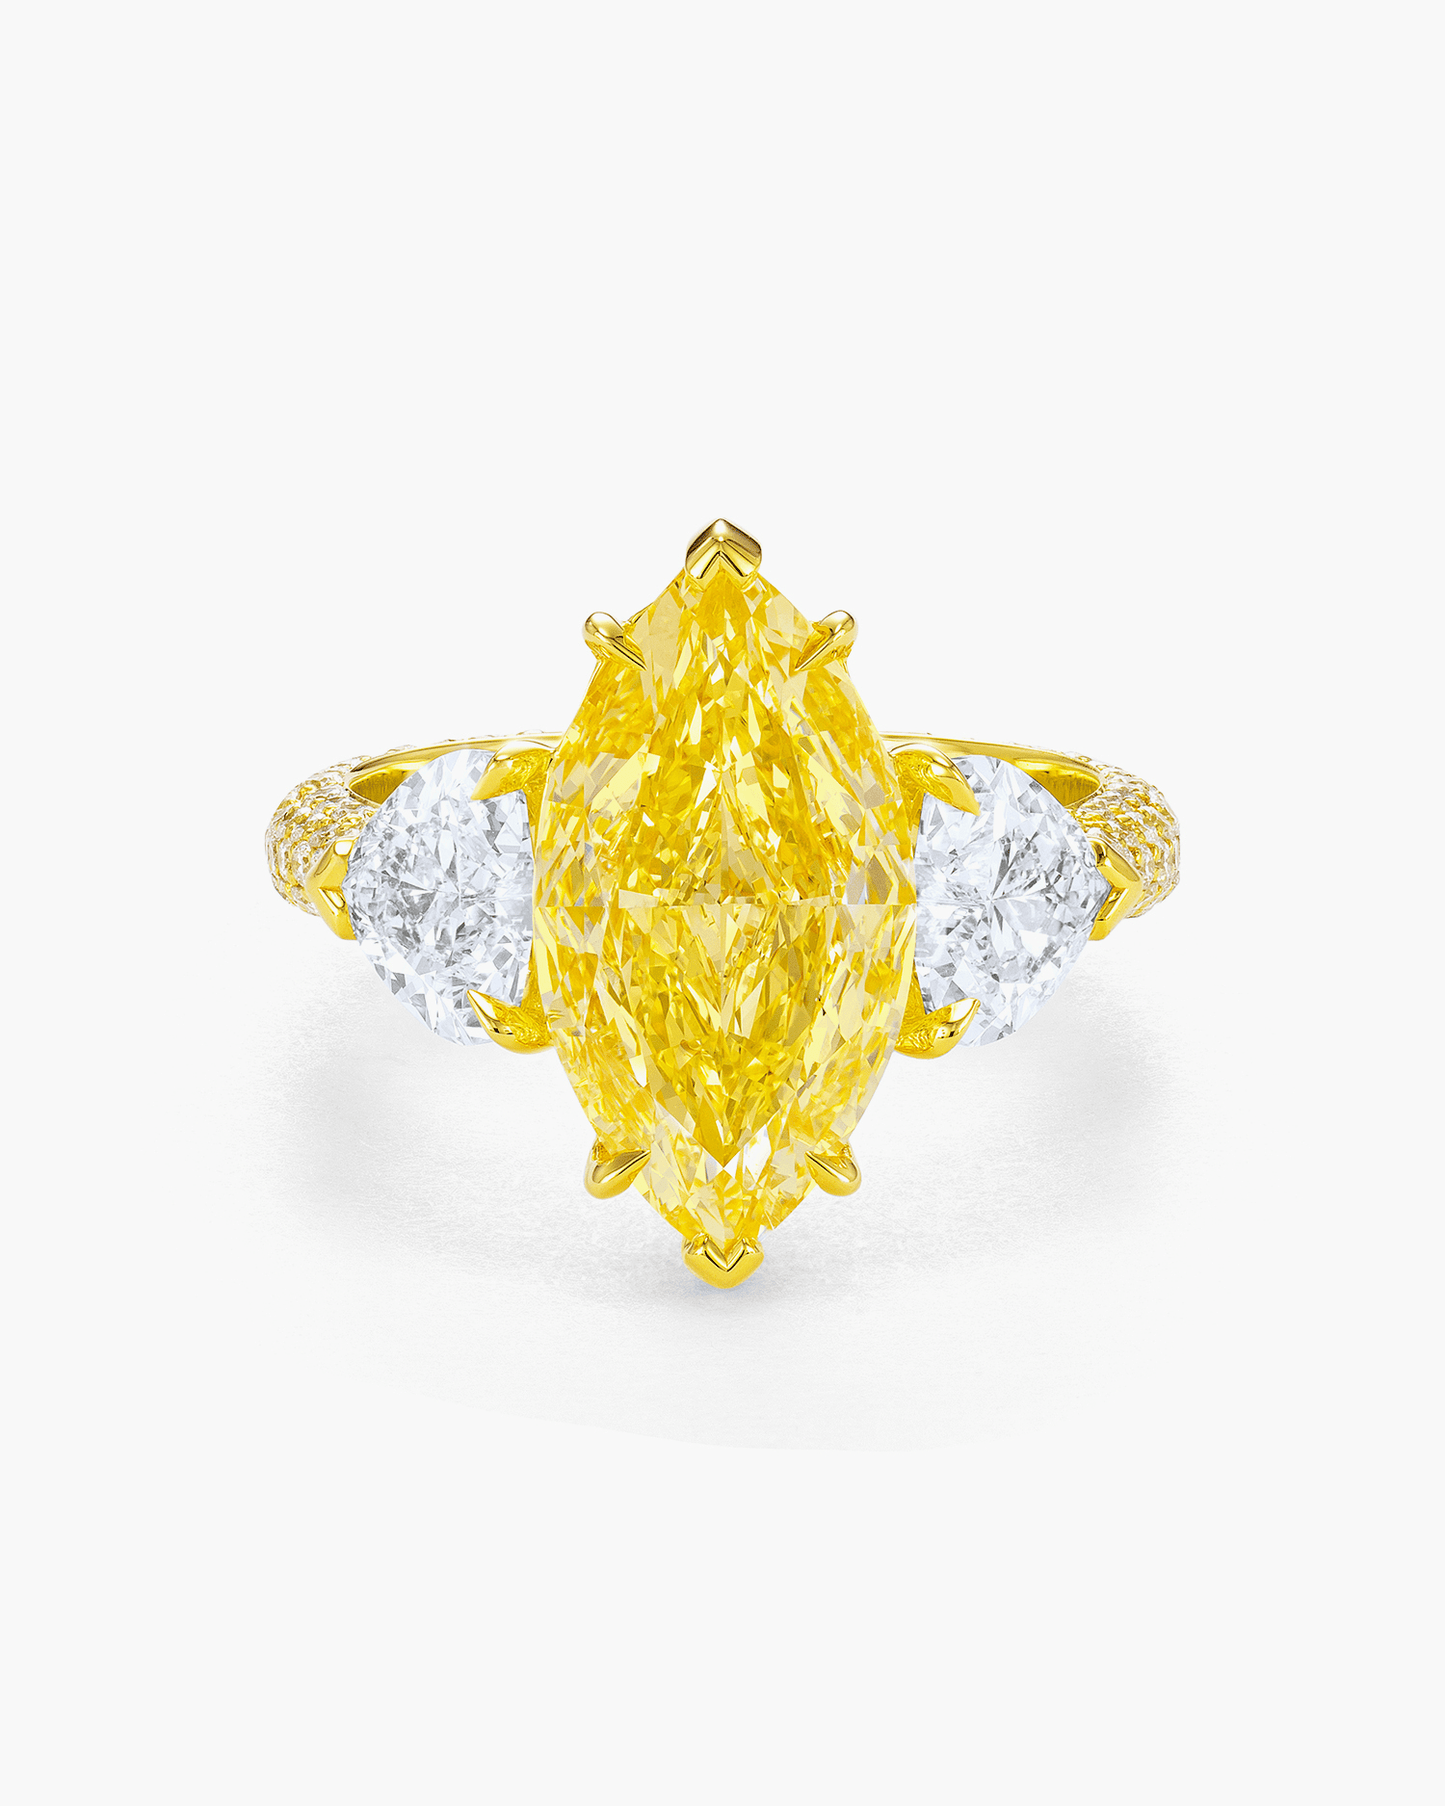 4.53 carat Marquise Shape Yellow and White Diamond Ring